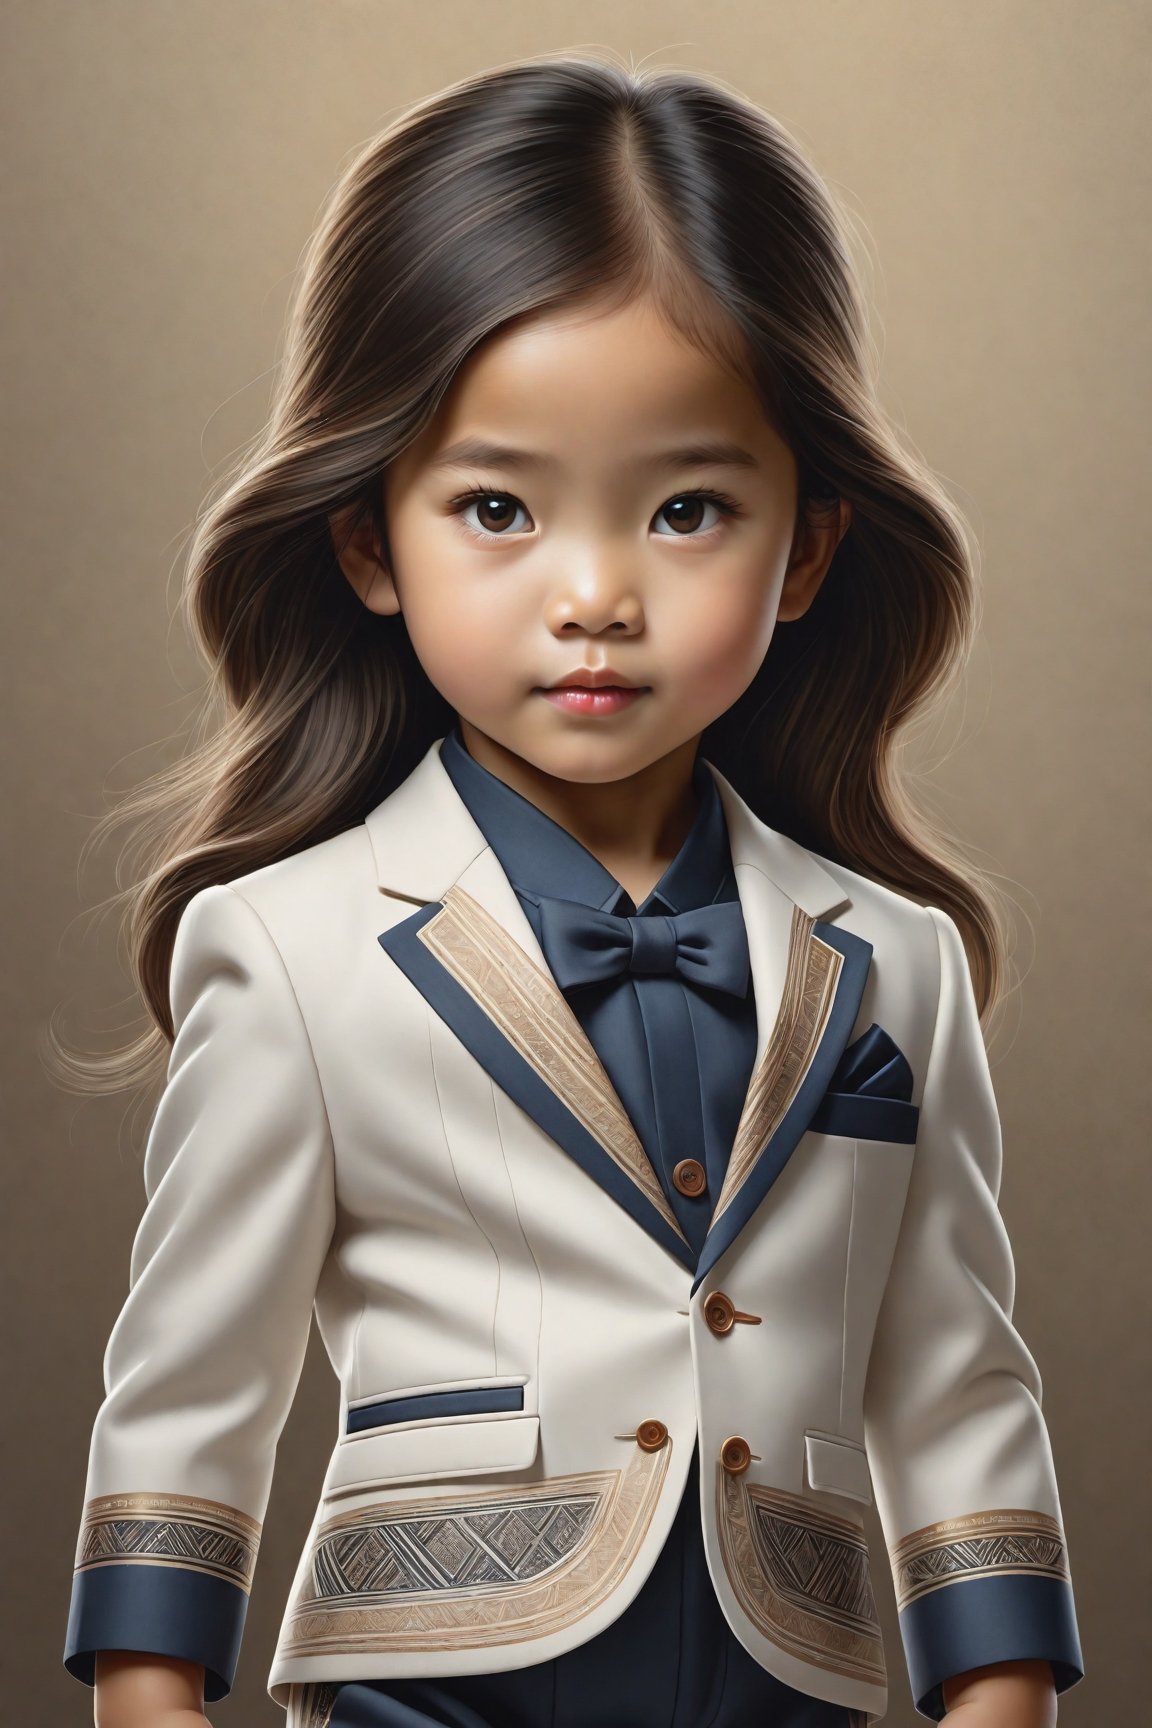 ((full body)) body_marking, highly detailed shot tribal version character of cute Vietnamese girl kid in elegant suits, masterpiece artwork, white accent, detailed face features, subtle gradients, extremely detailed, photorealistic, 8k, centered, perfect symmetrical, studio photography, muted color scheme, made with adobe illustrator, solid dark background 